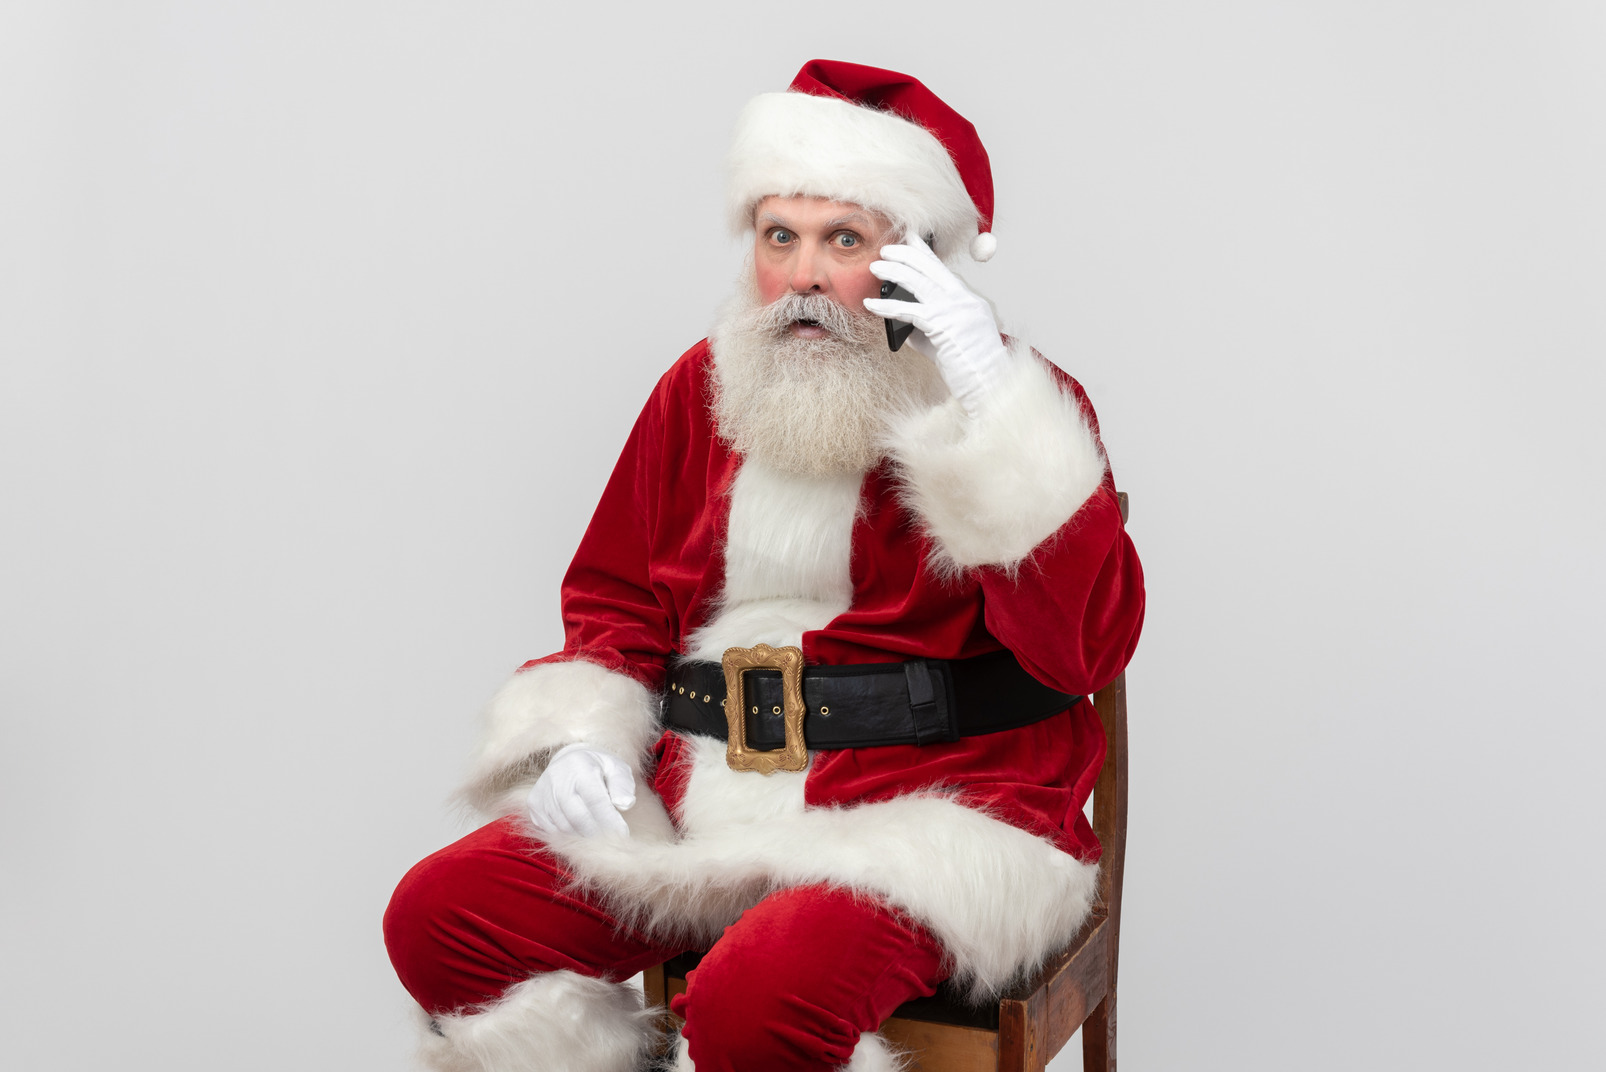 Santa claus seems to be surprised with conversation